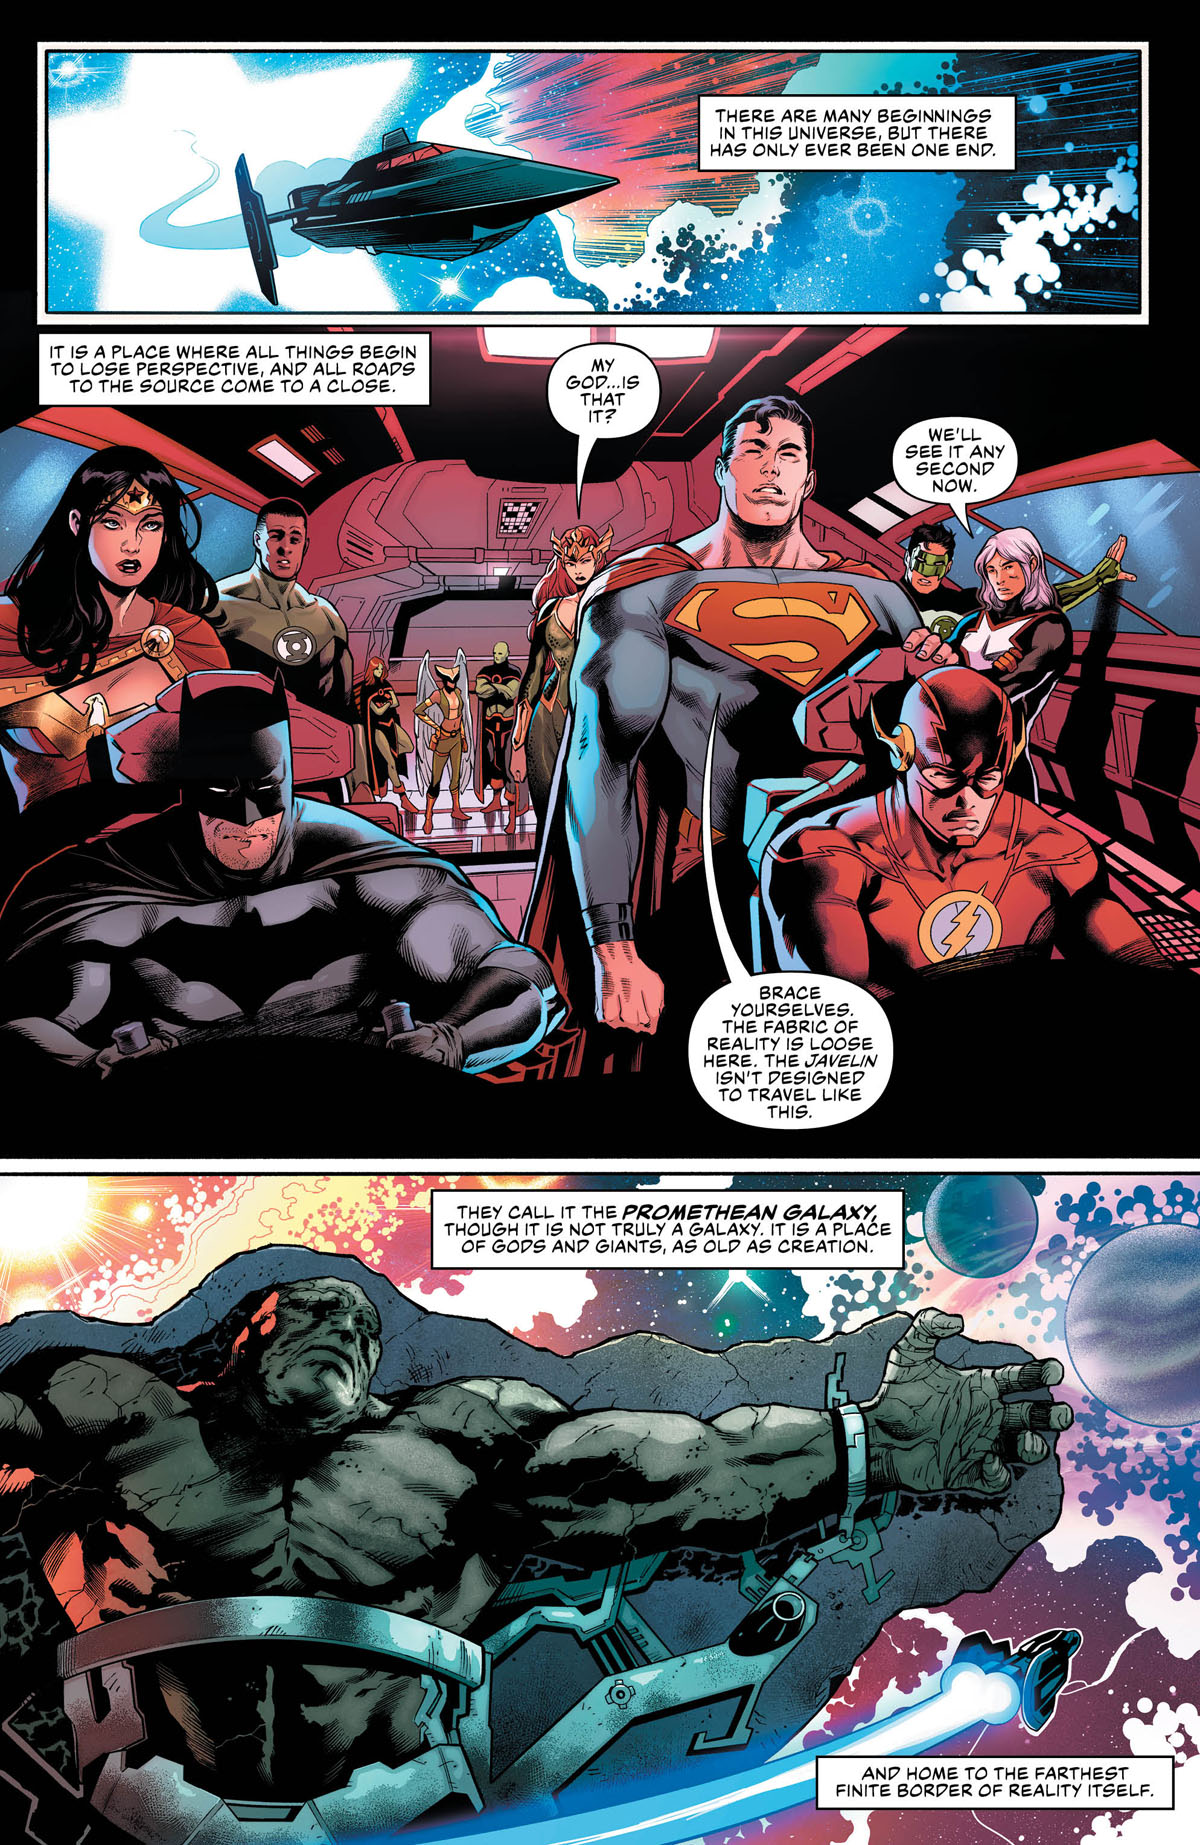 Scott Snyder & James Tynion IV Take Us Beyond Justice League Annual #1